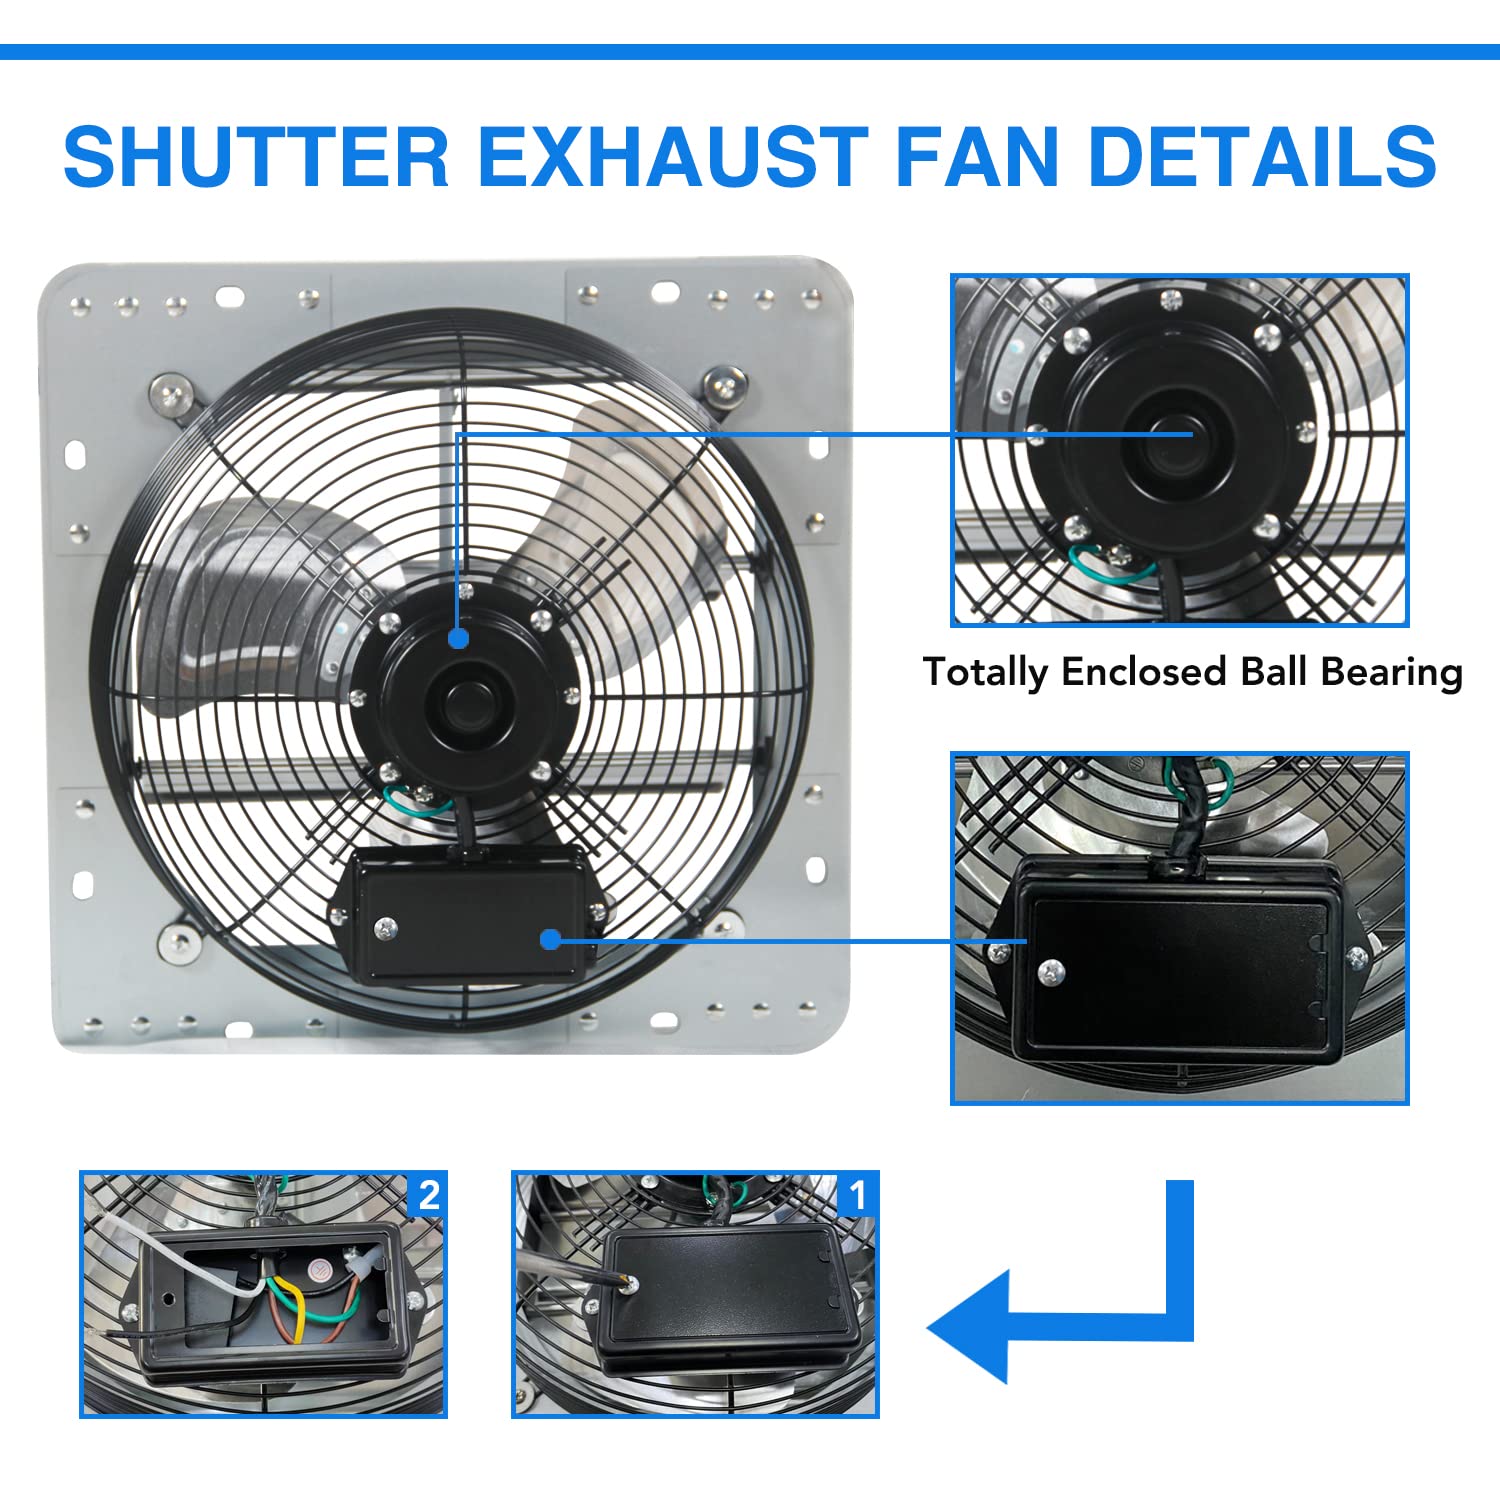 KEN BROWN 12 Inch Variable Shutter Exhaust Fan Wall Mounted With Speed Controller 1800CFM For Garages And Shops,Greenhouse,Attic Ventilation